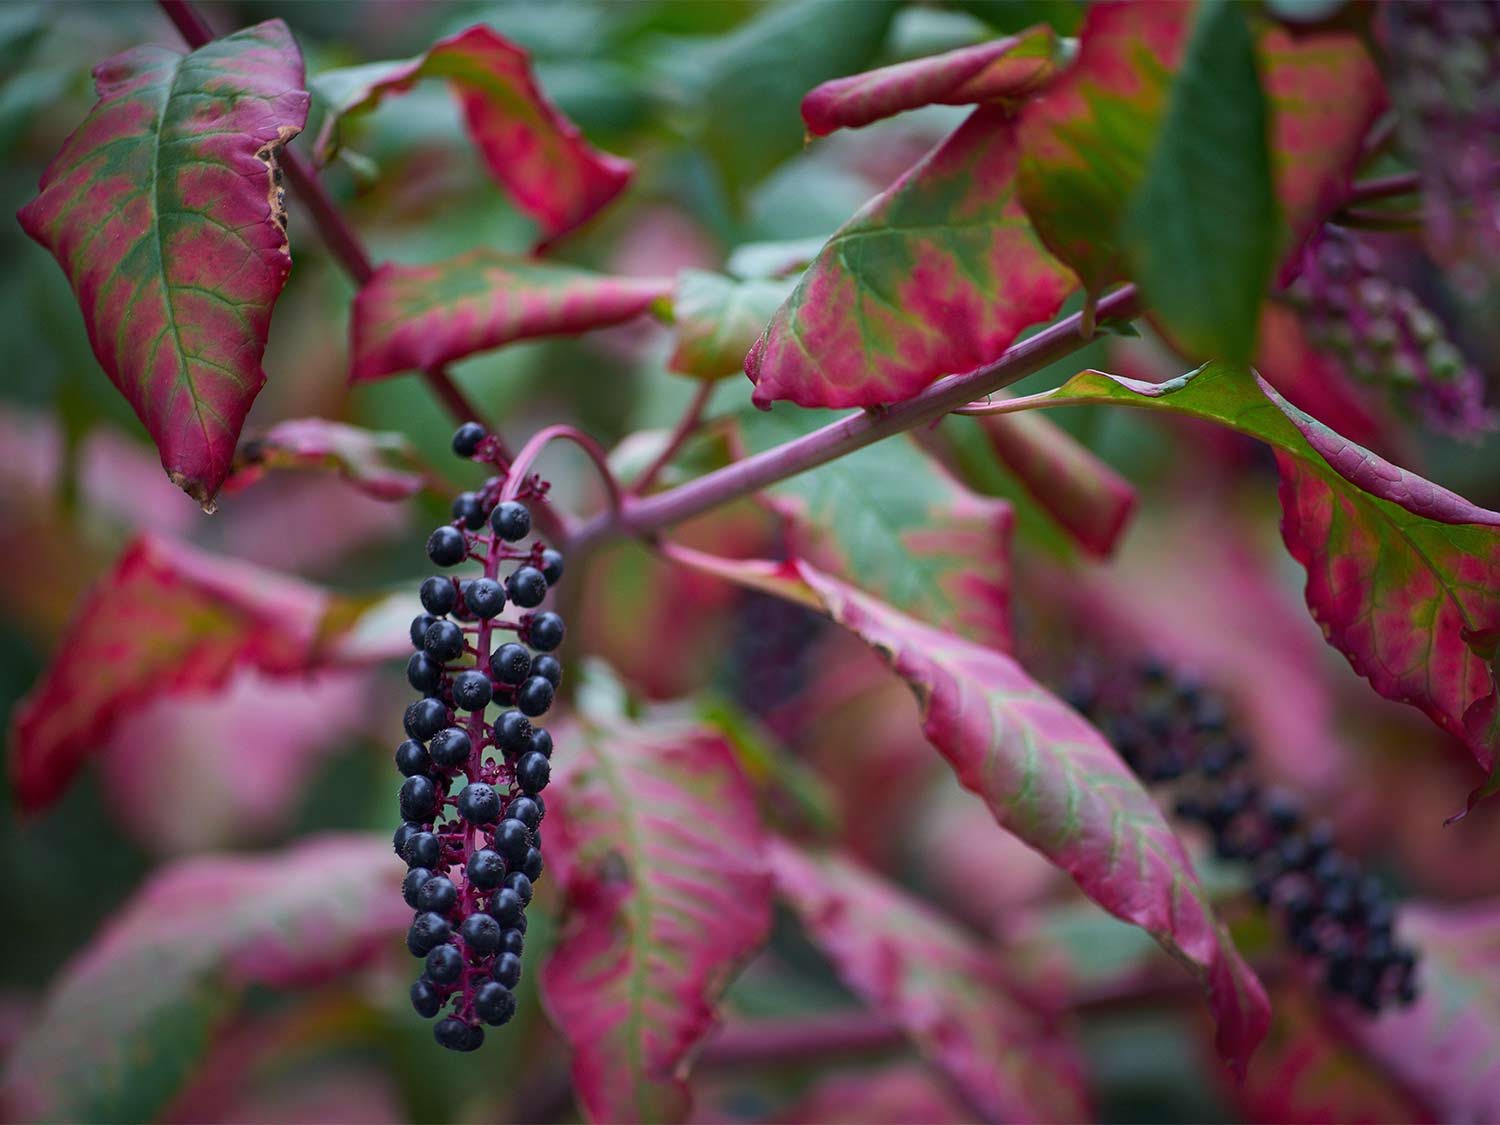 A hanging cluster of pokeweed berries